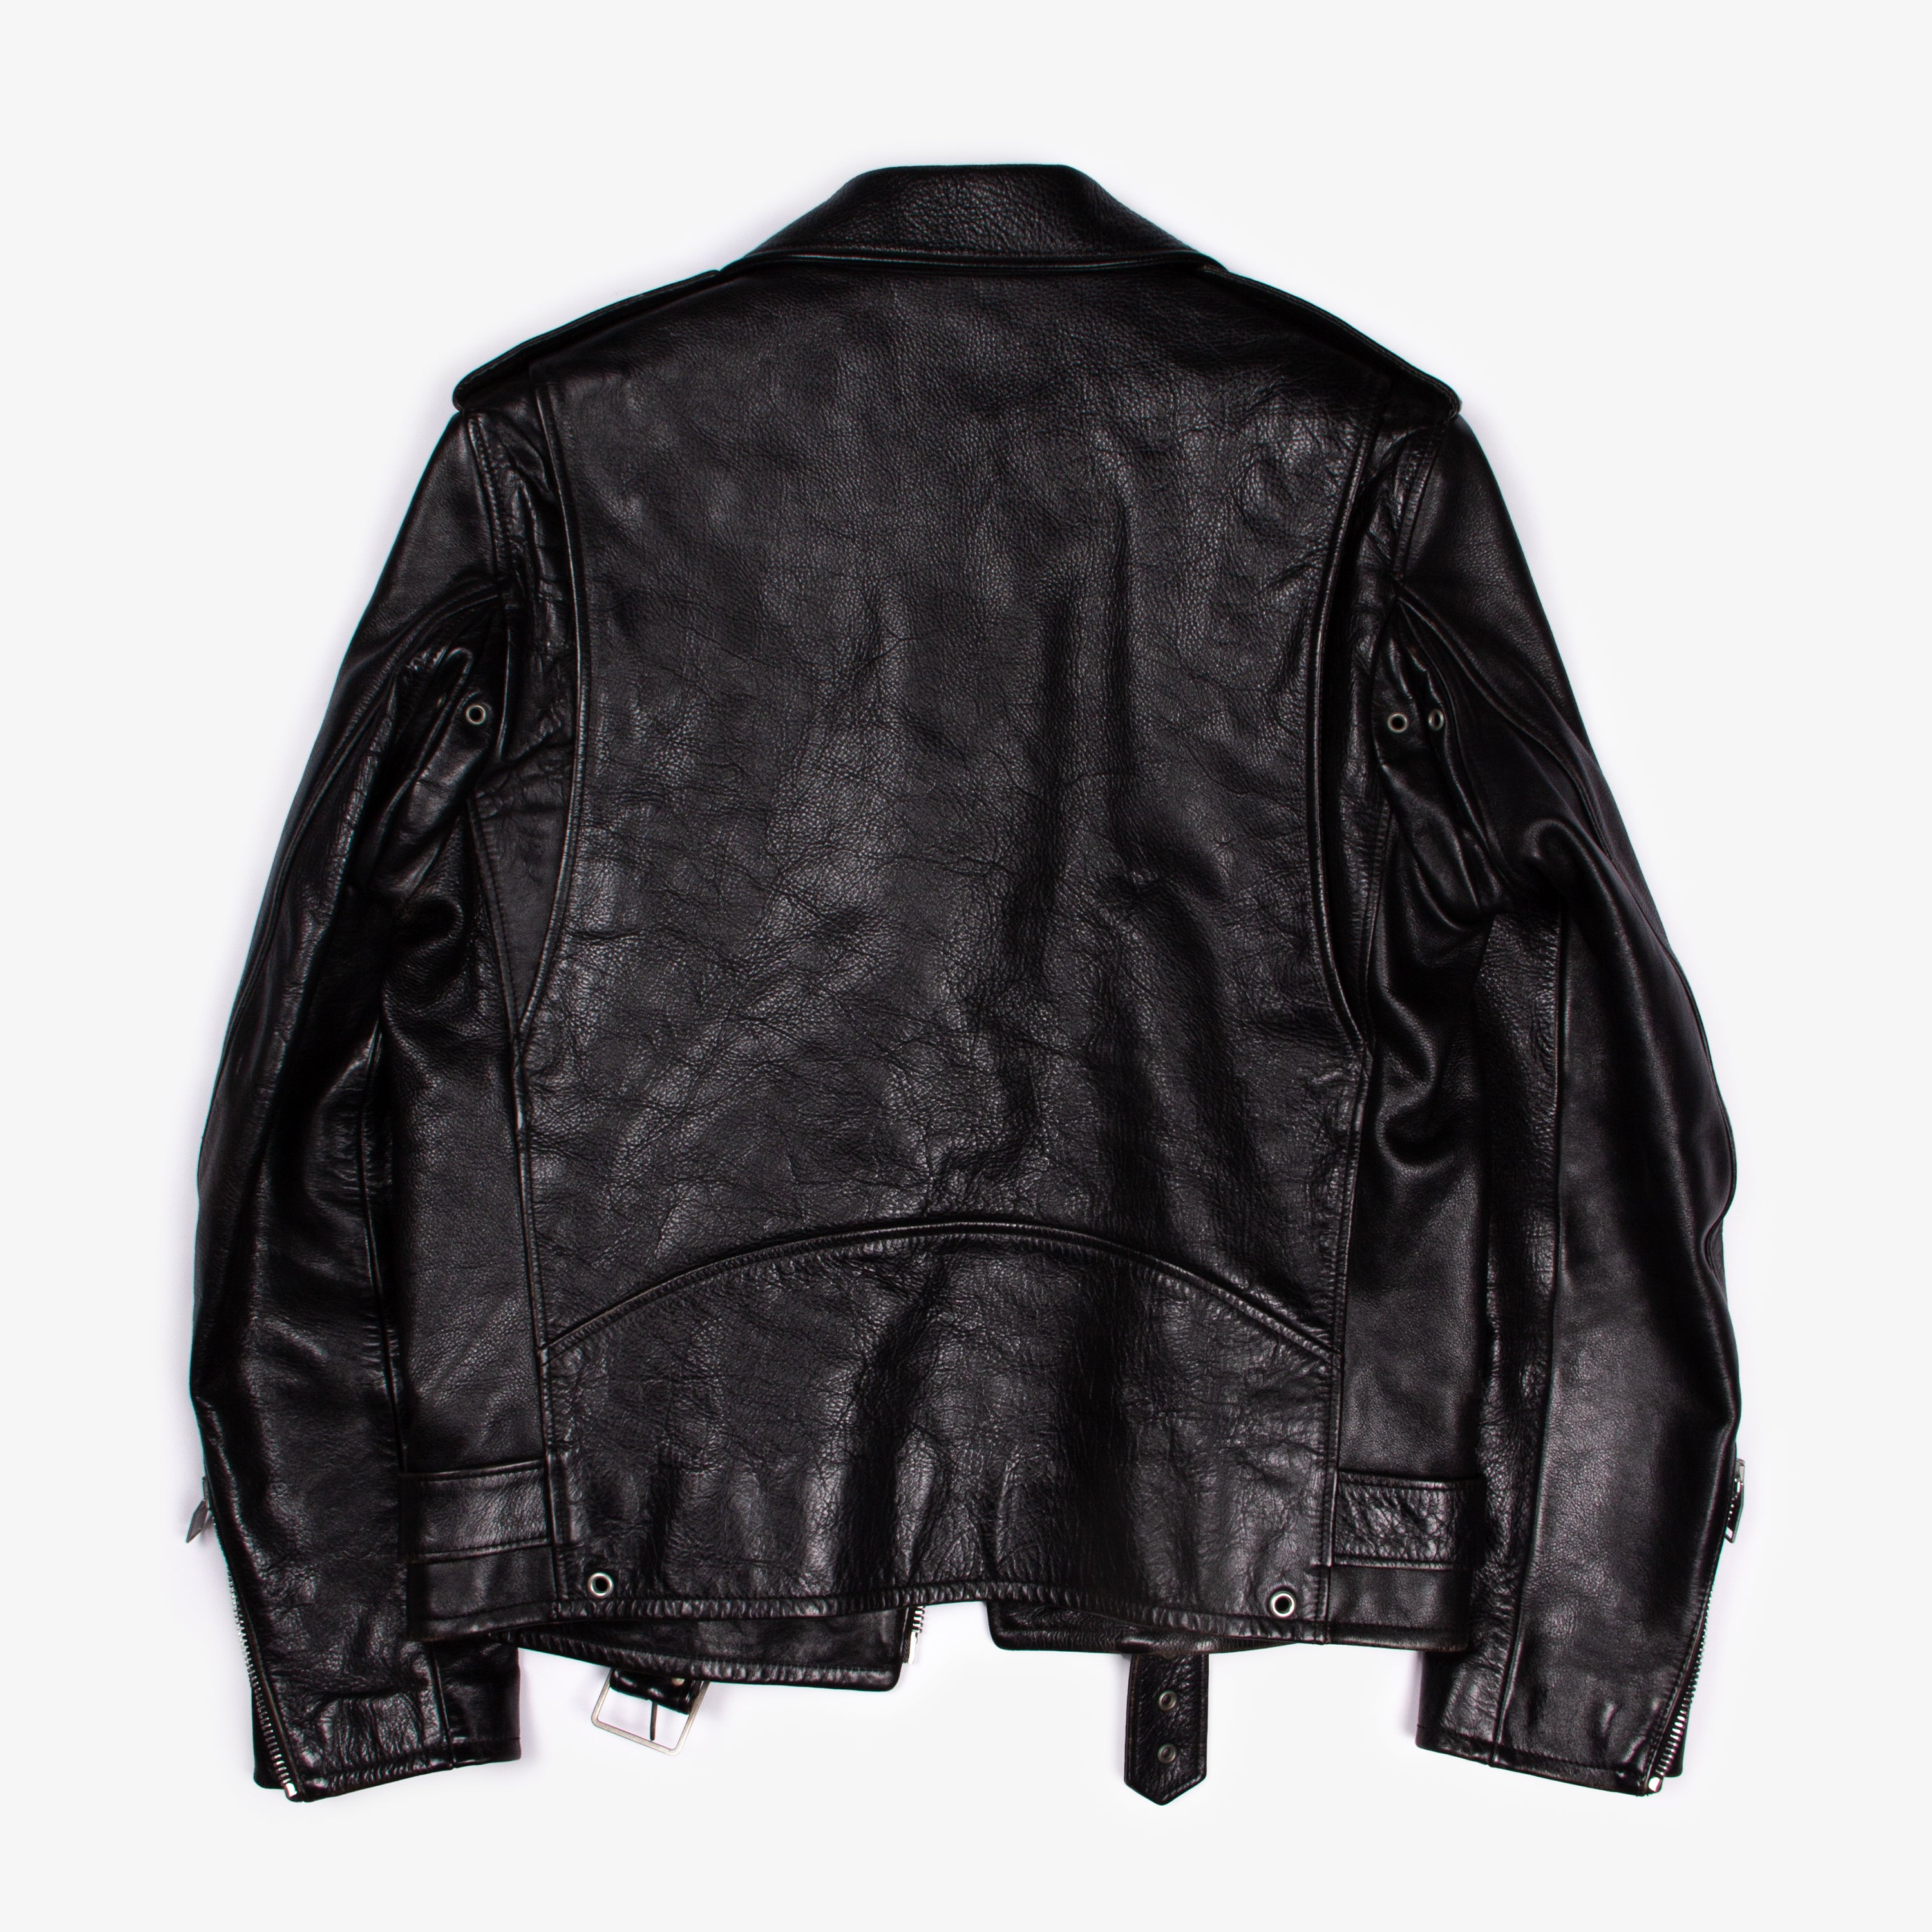 AW13 L17 LEATHER RUNWAY JACKET | 48